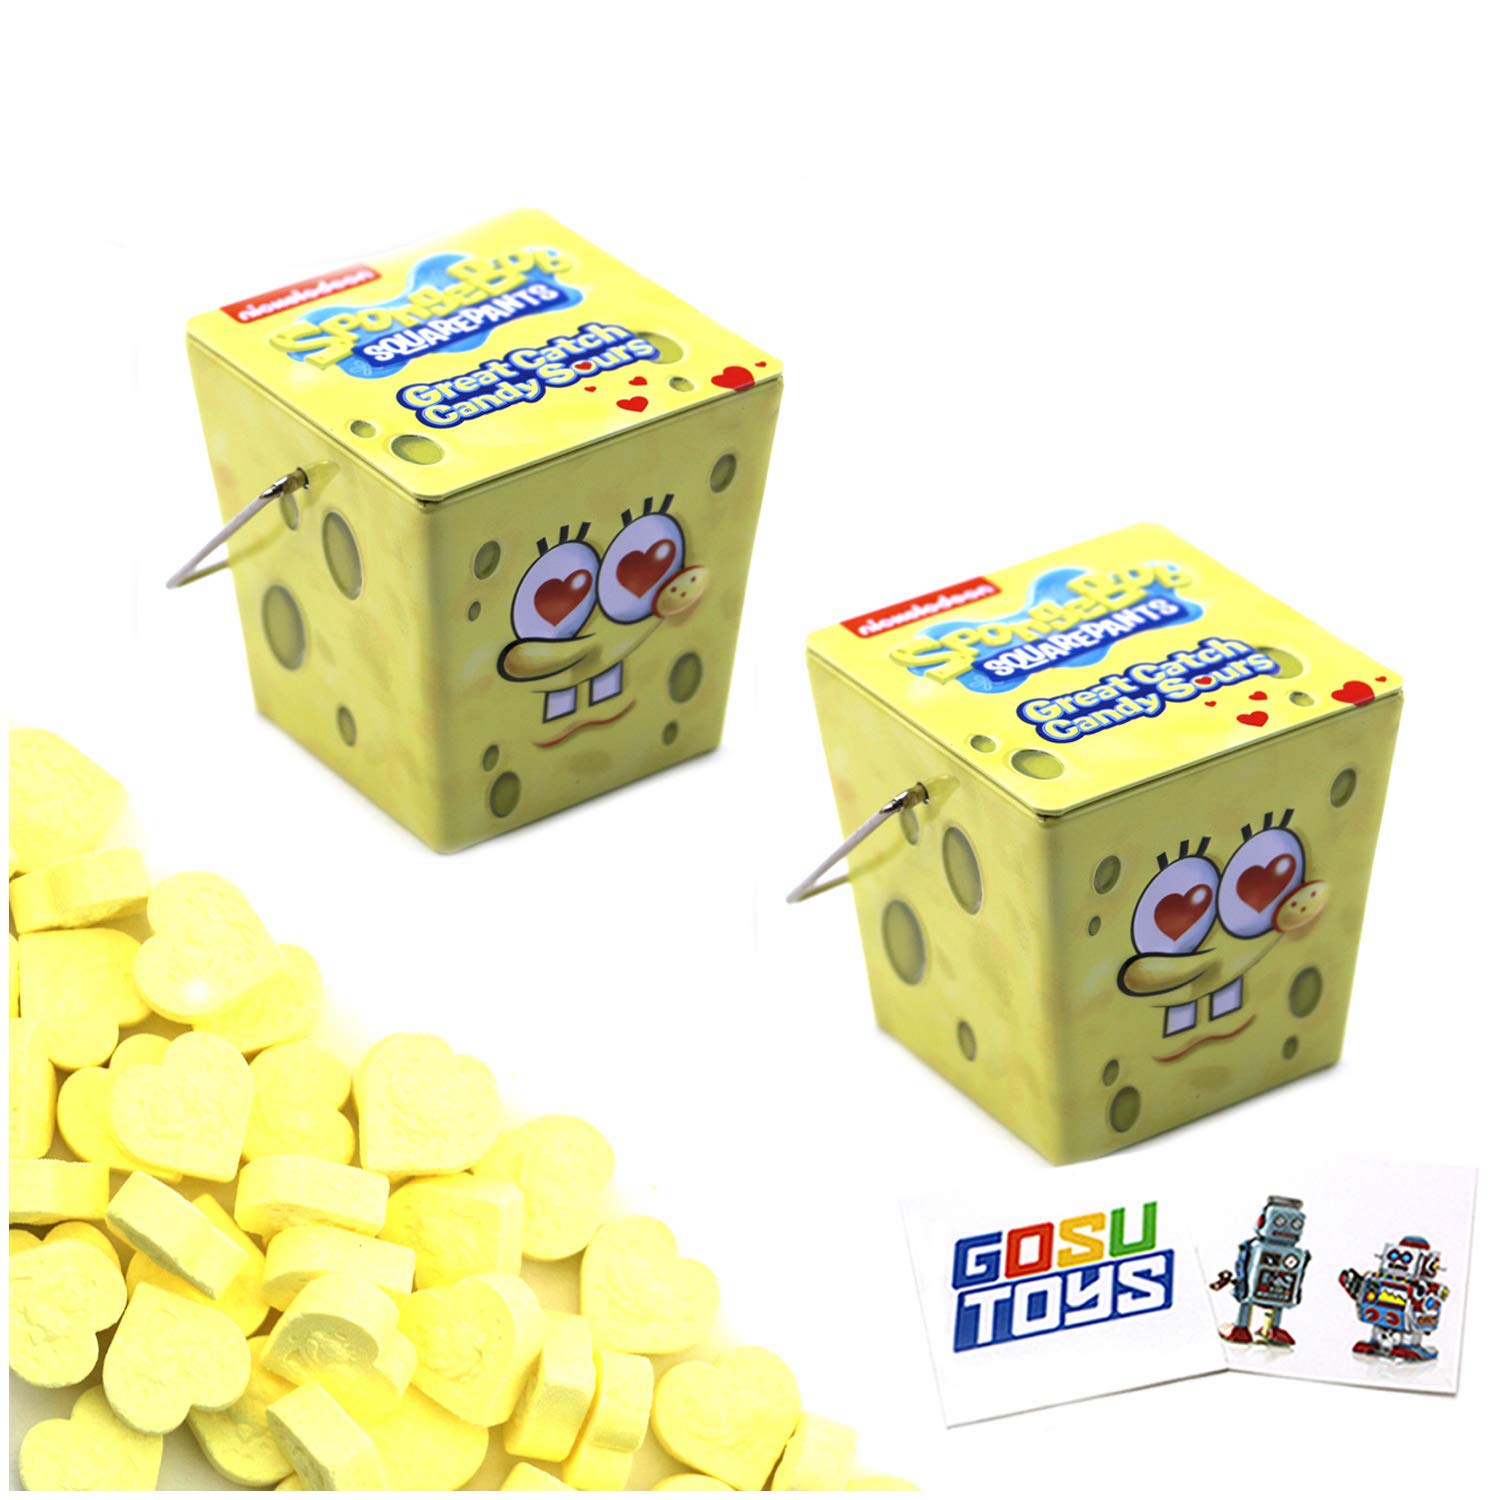 SpongeBob Great Catch Square Bucket Tin Candy (2 Pack) Strawberry Lemonade Flavor Heart Shaped Gift Stuffers with 2 GosuToys Stickers